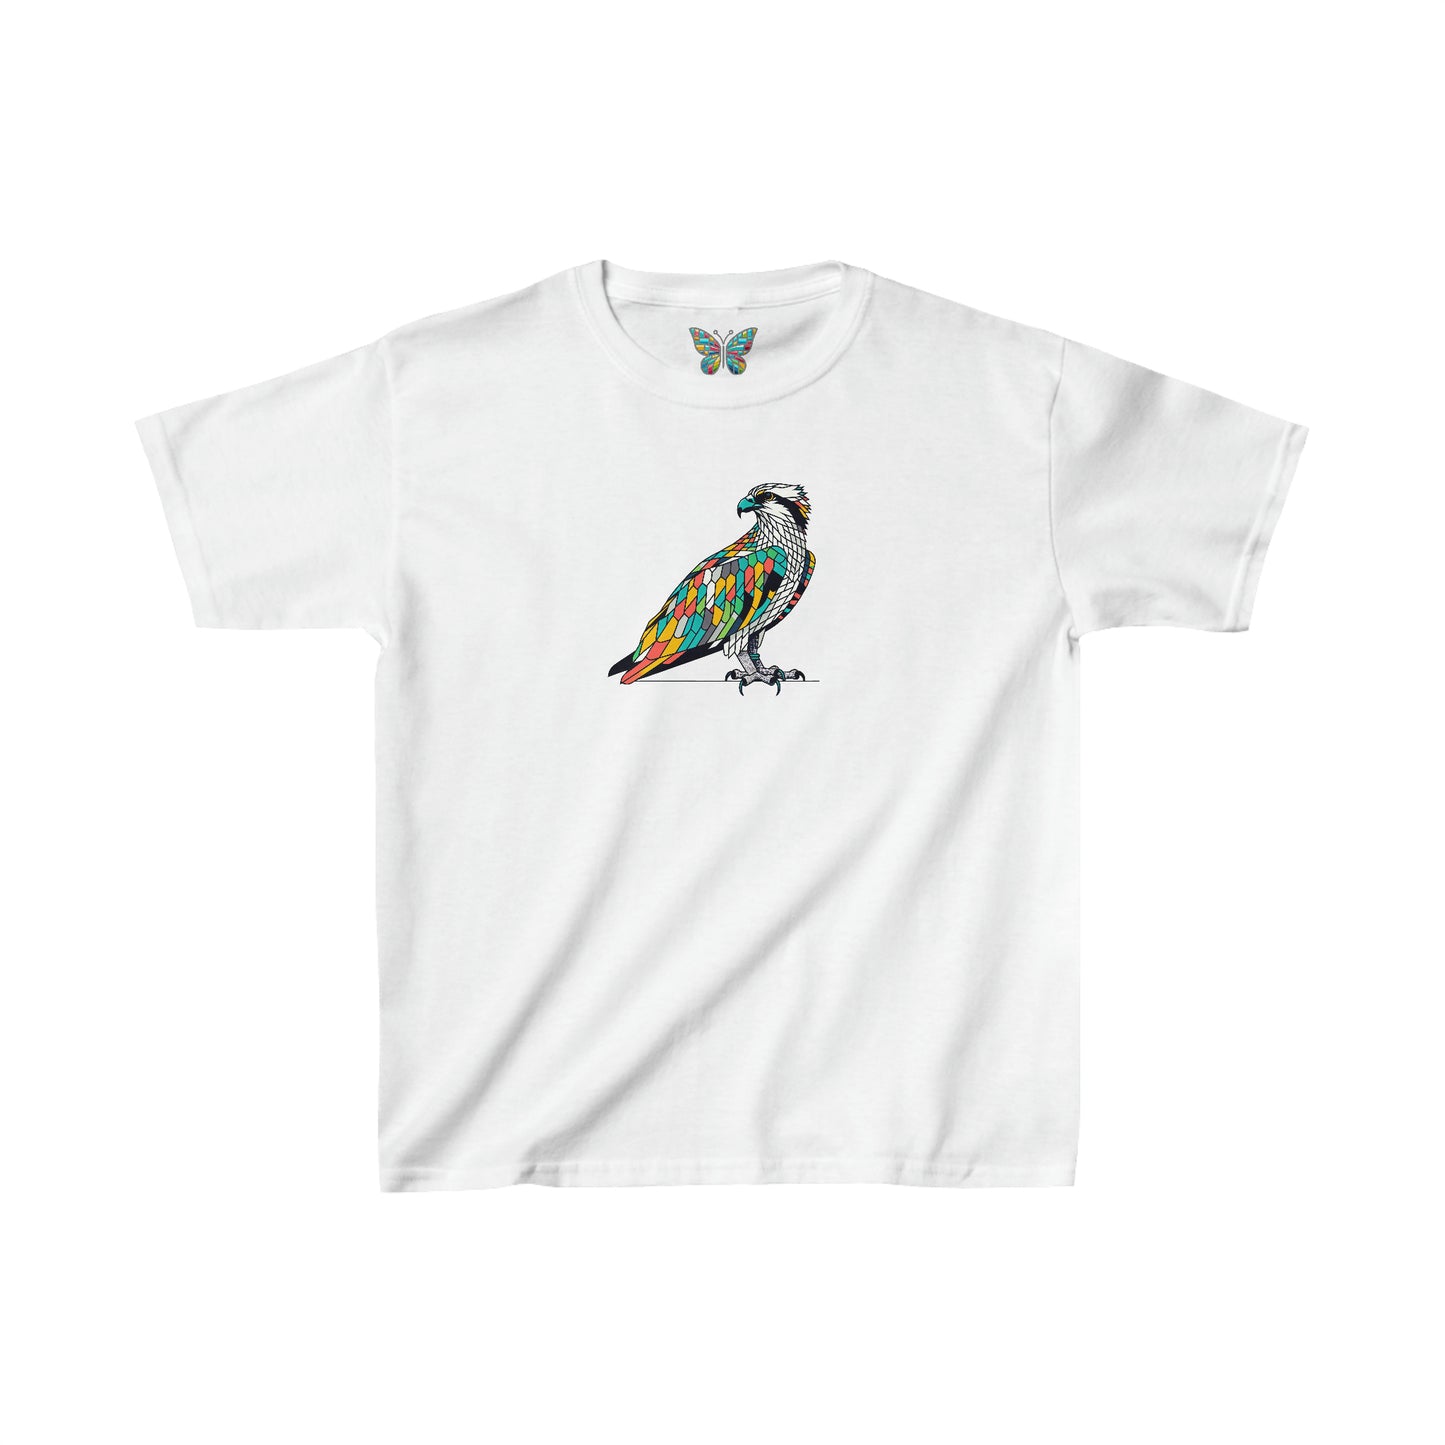 Osprey Quillabrate - Youth - Snazzle Tee